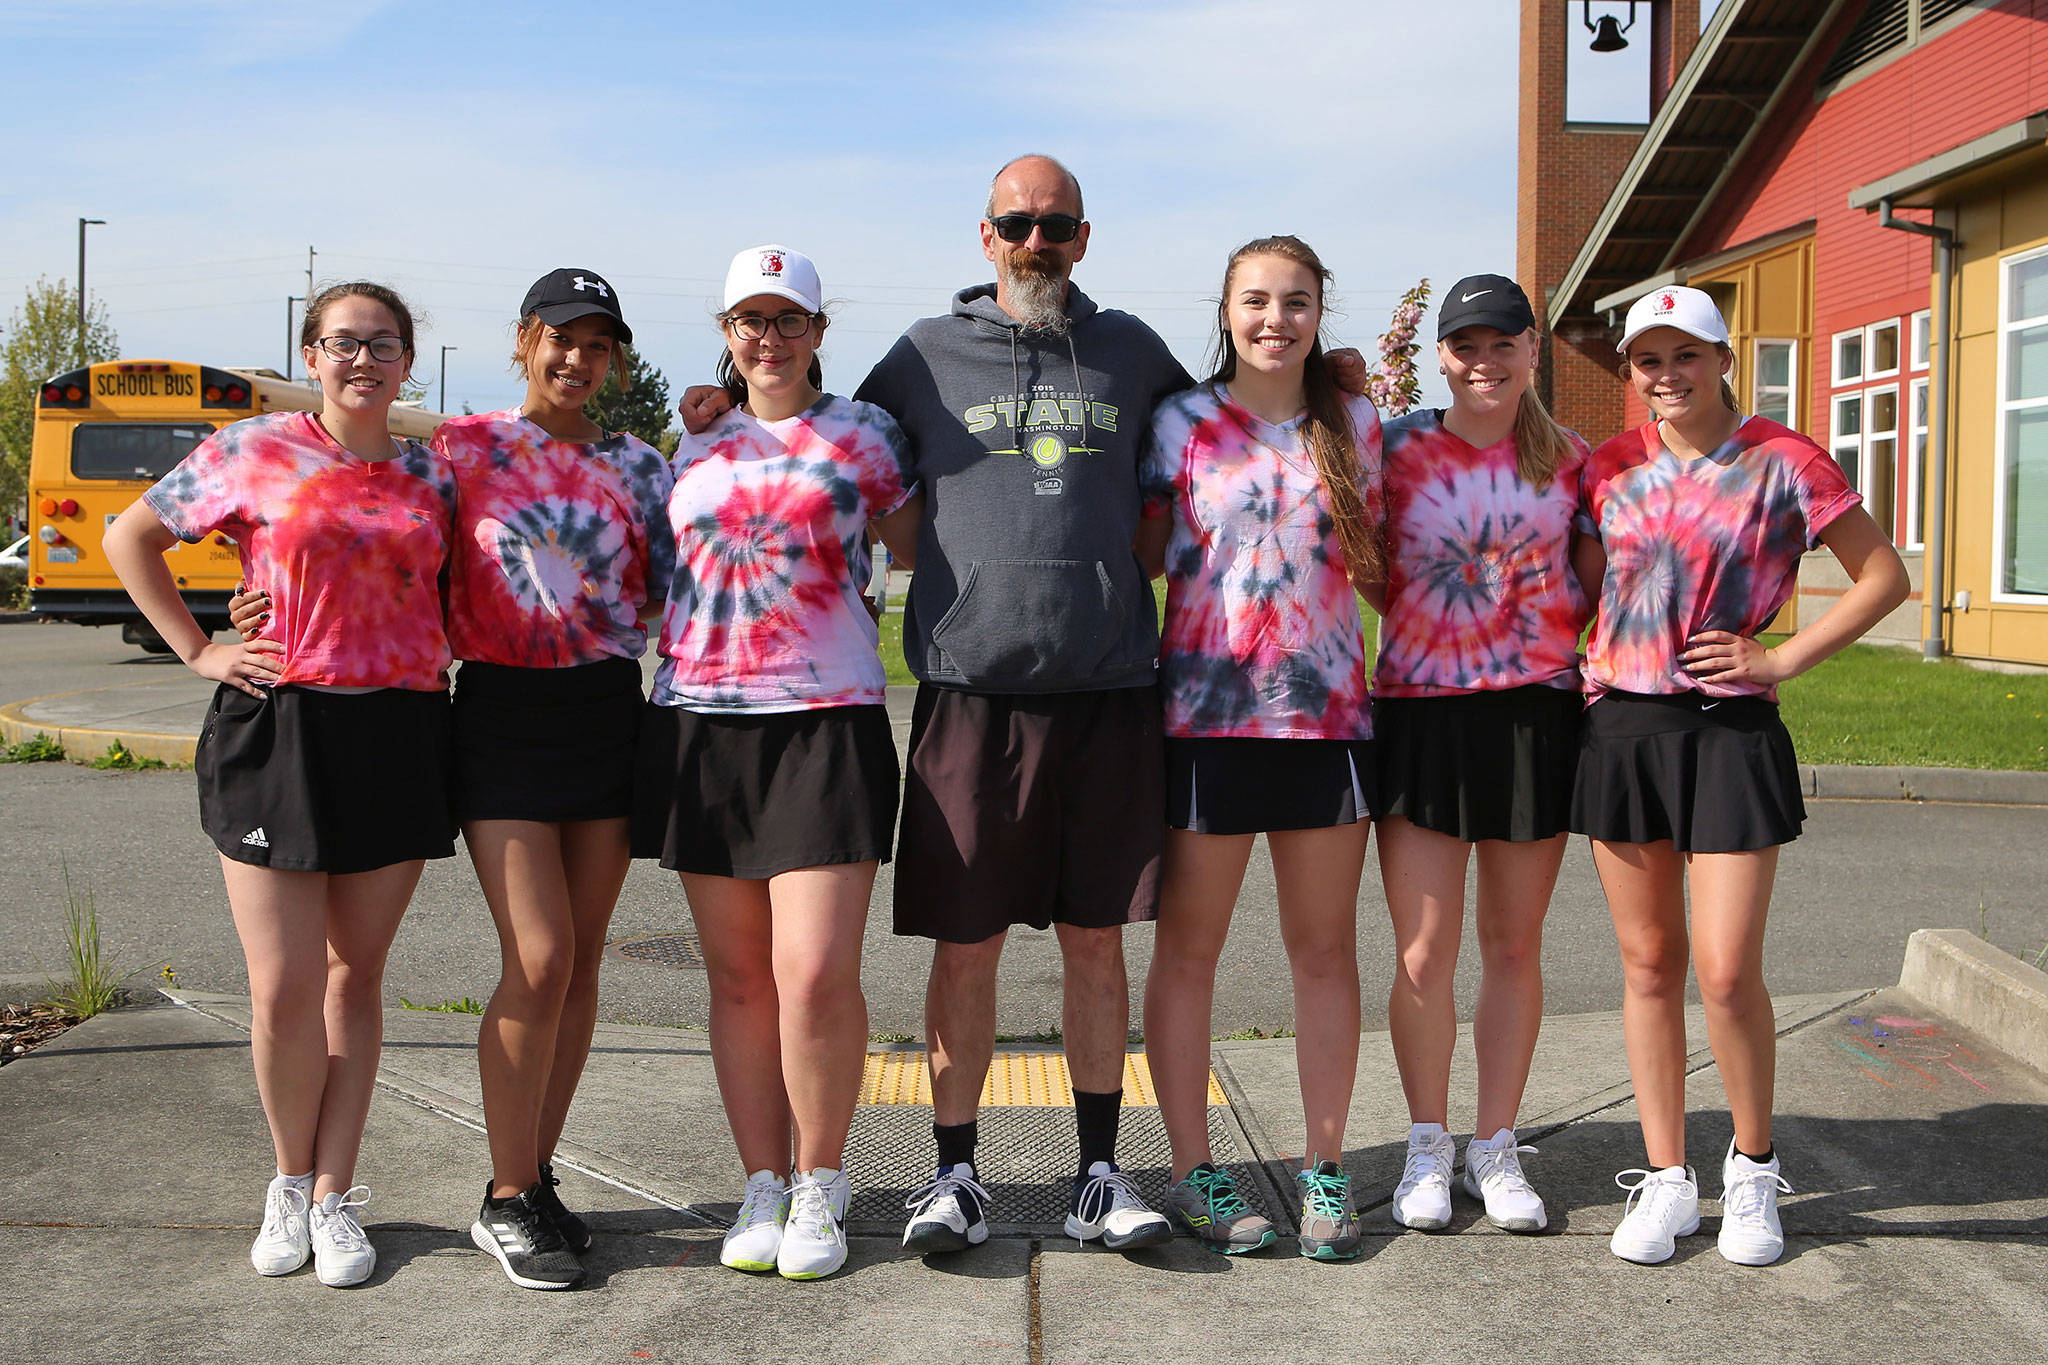 Coach Ken Stange stands with his six seniors who helped the Wolves win four Olympic League titles during their stay at Coupeville High School. From the left are Heather Nastali, Kameryn St. Onge, Claire Mietus, Maggie Crimmins, Sage Renninger and Payton Aparicio. (Photo by John Fisken)